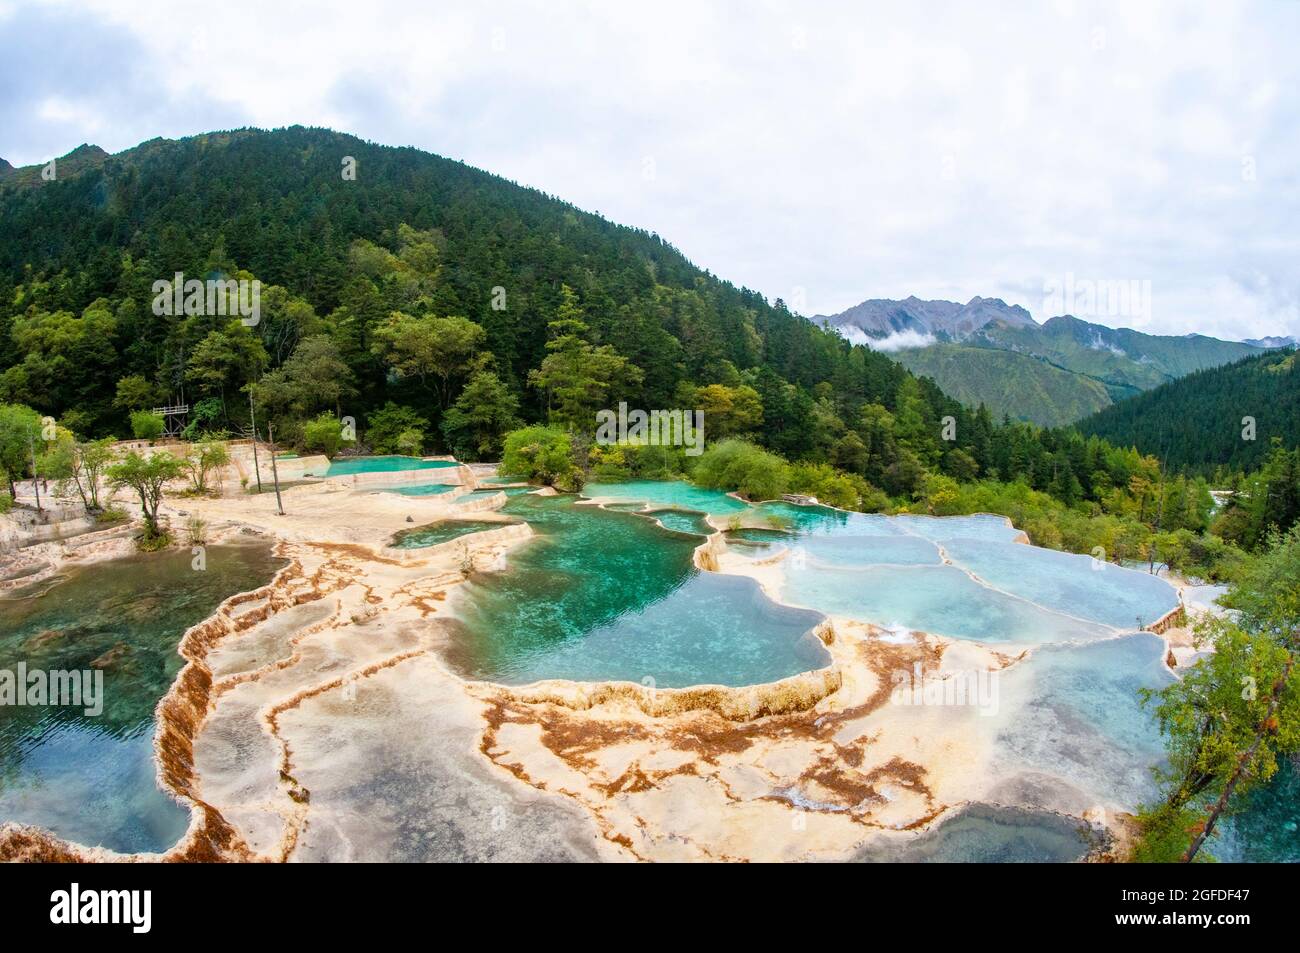 Huanglong national park in Songpan county Sichuan province China Stock Photo